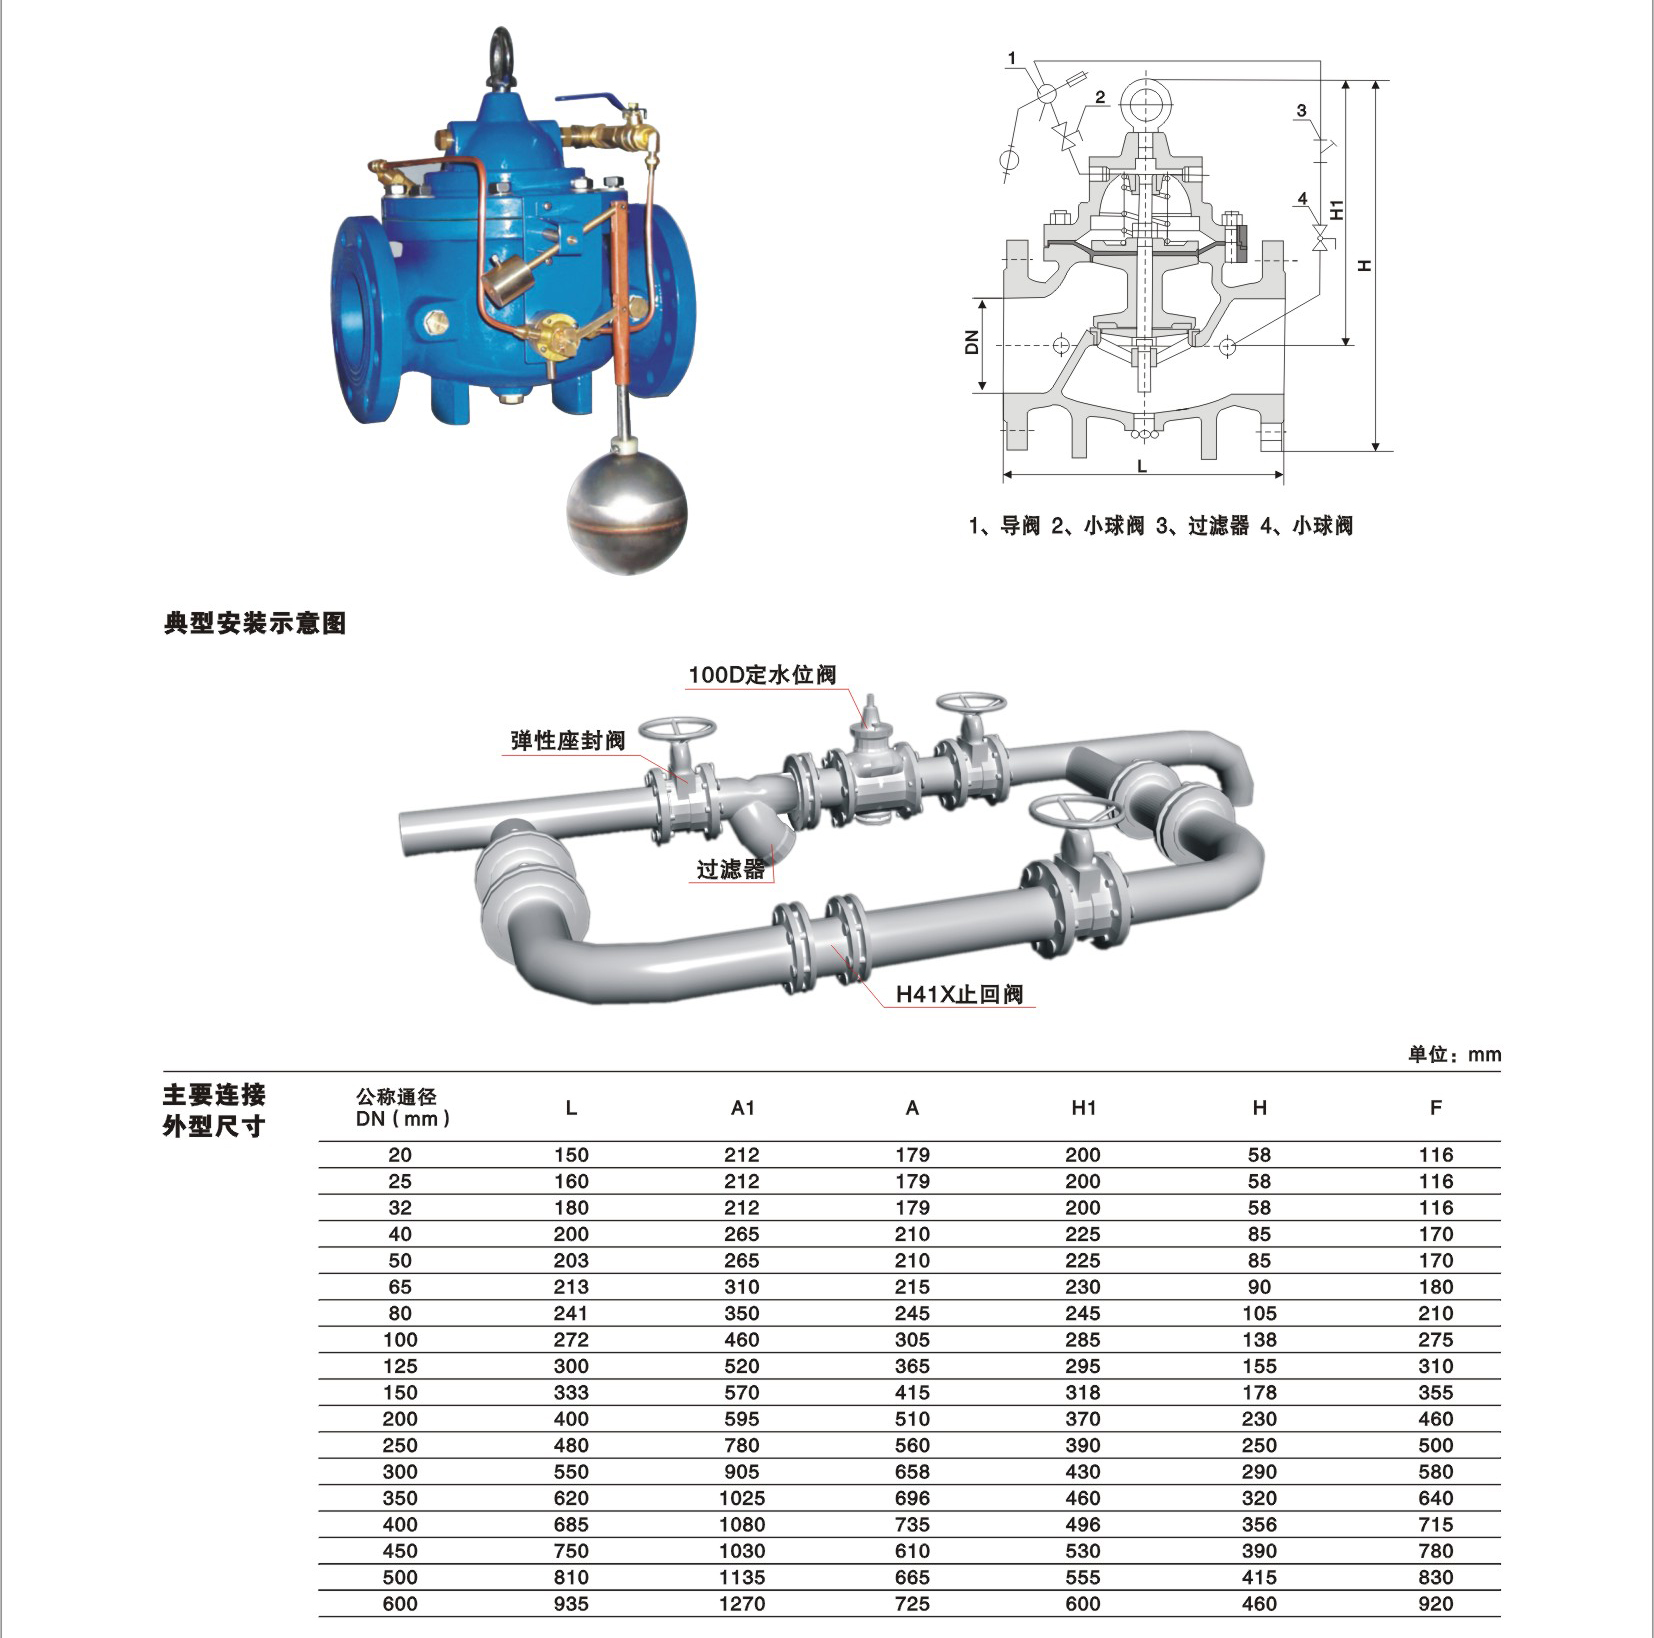 2019 New Style China API 526 Spring Loaded Flanged Pressure Relief Safety Valve